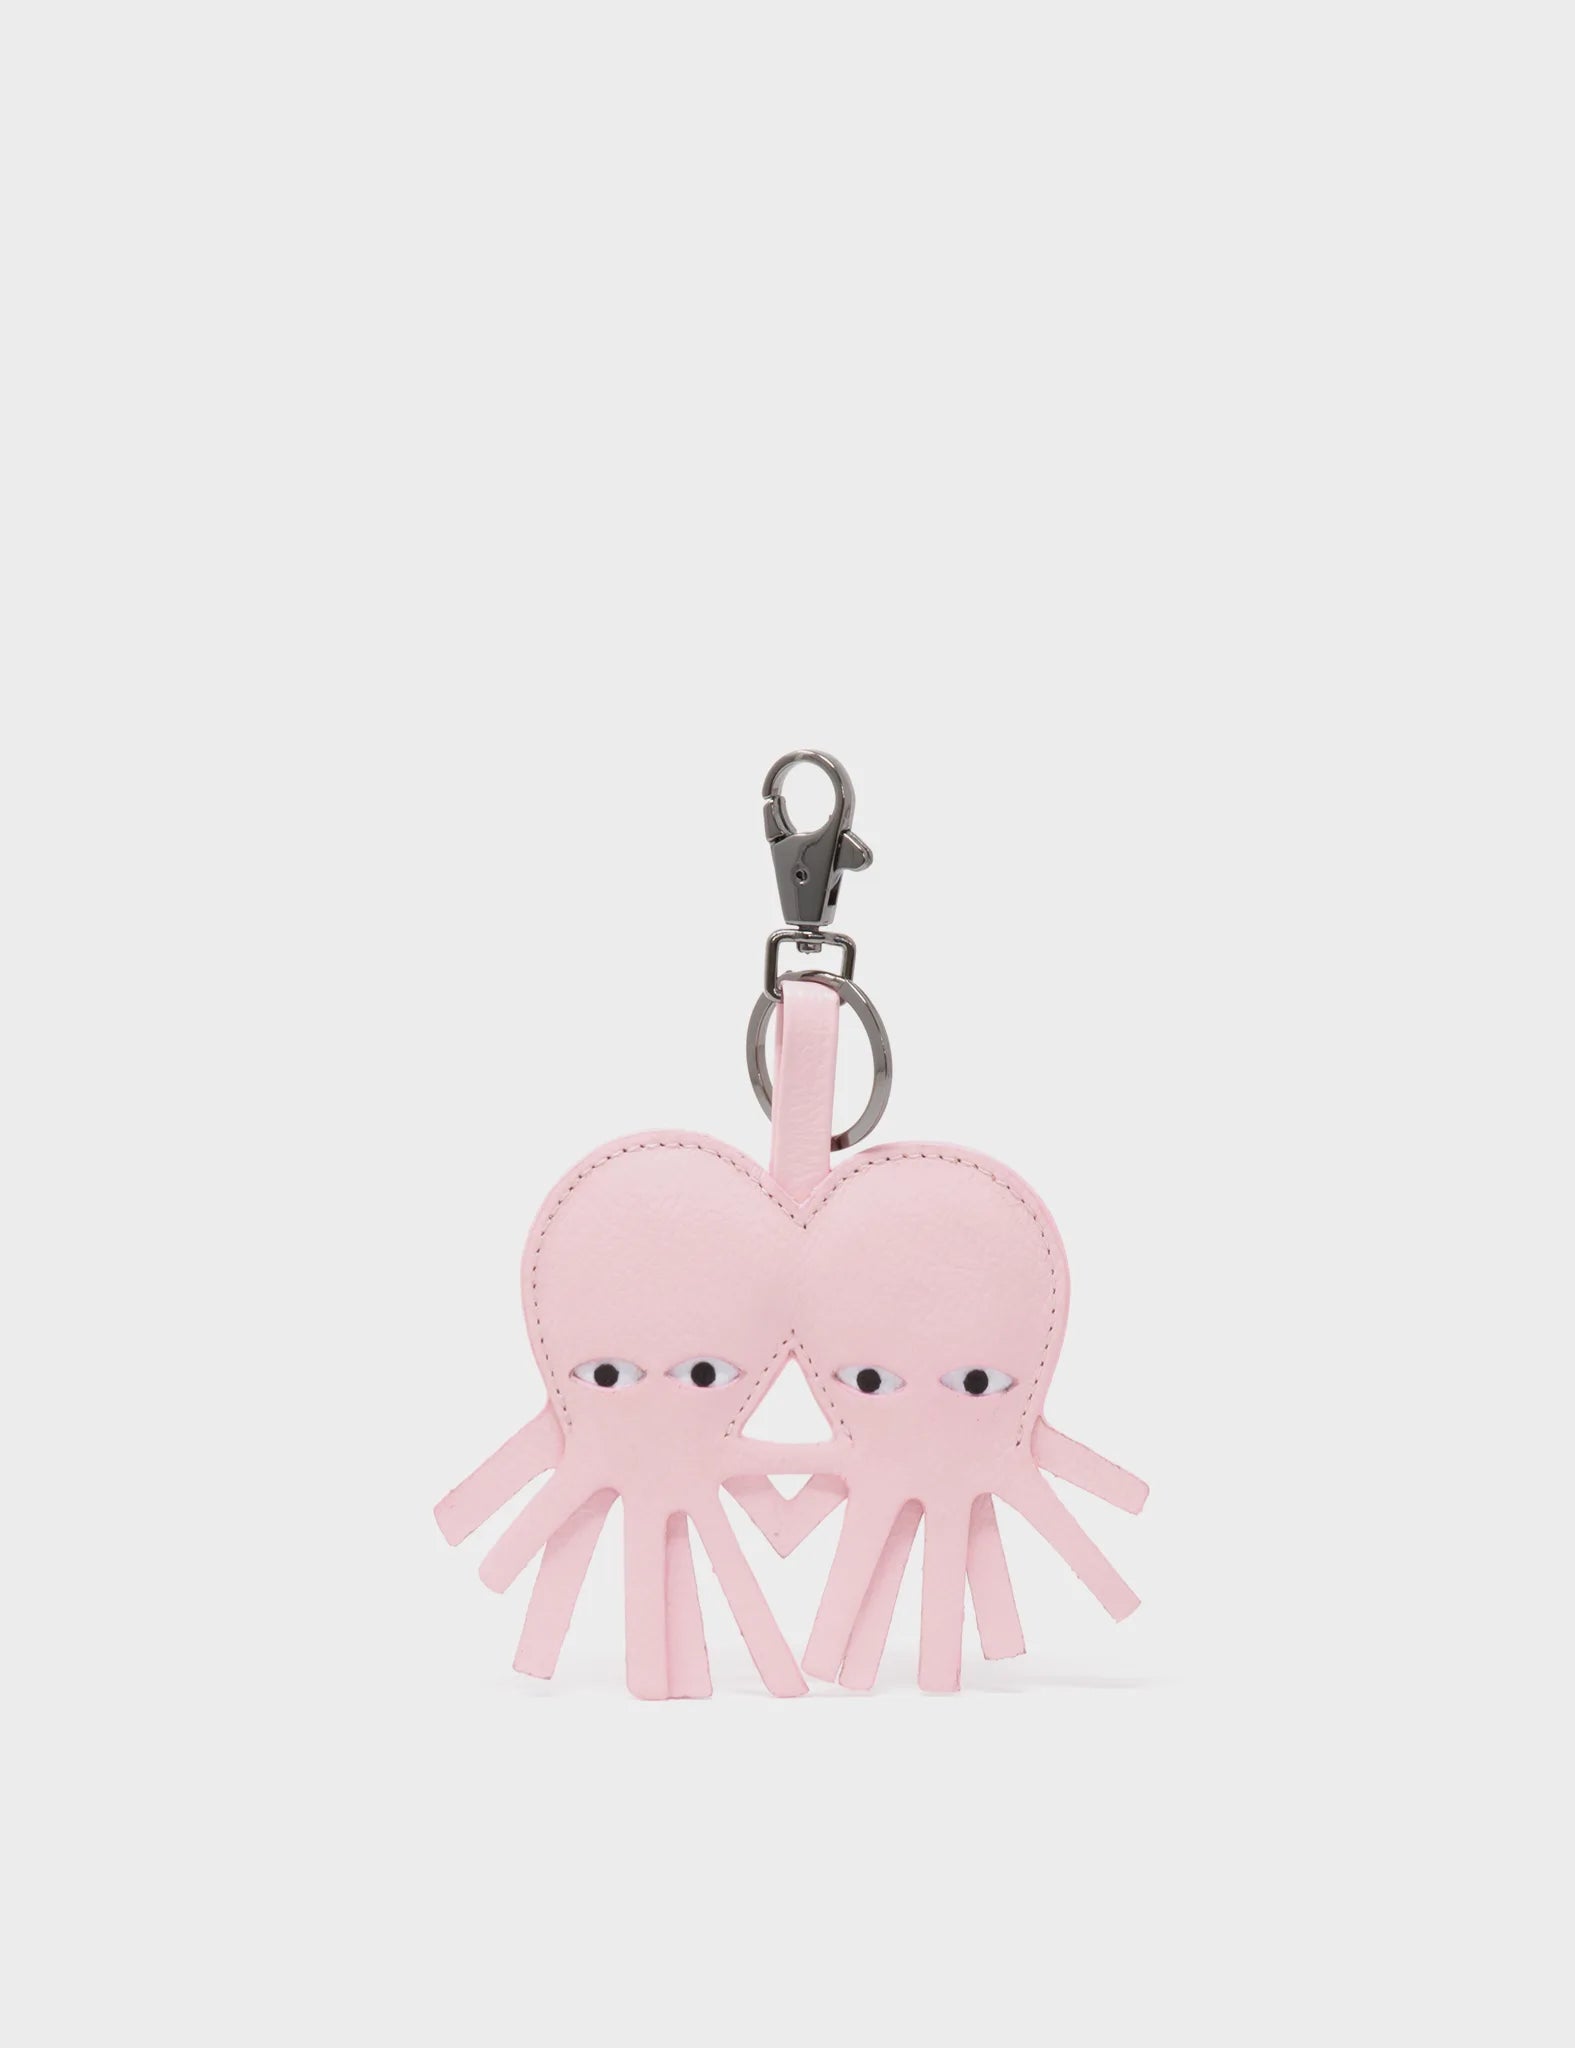 Octopus twins Charm - Blush Pink Leather Keychain